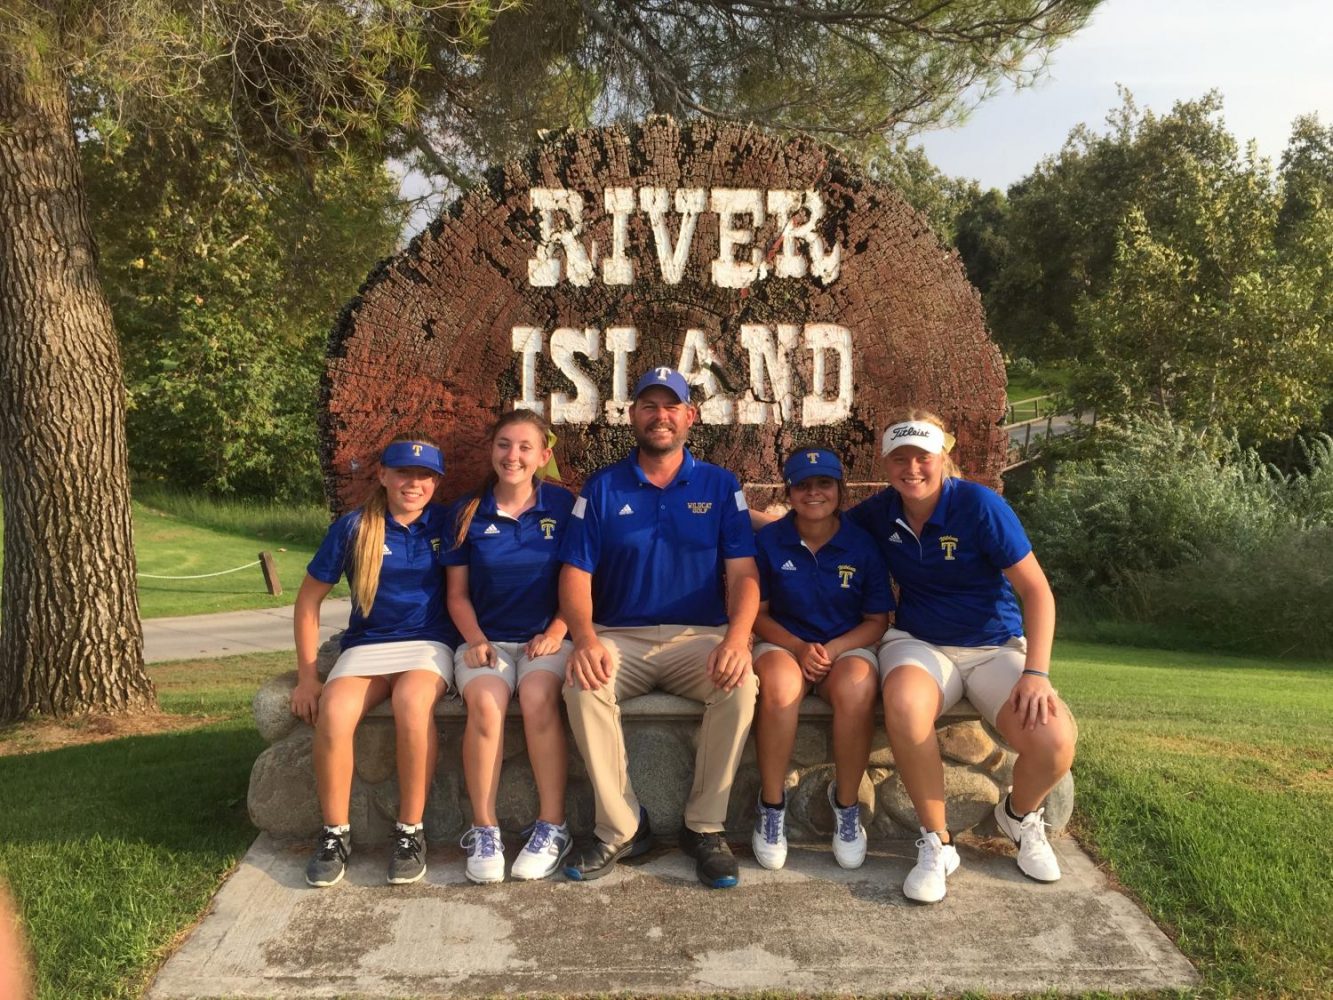 Girls Golf team players competing at River Island non-league tournament.